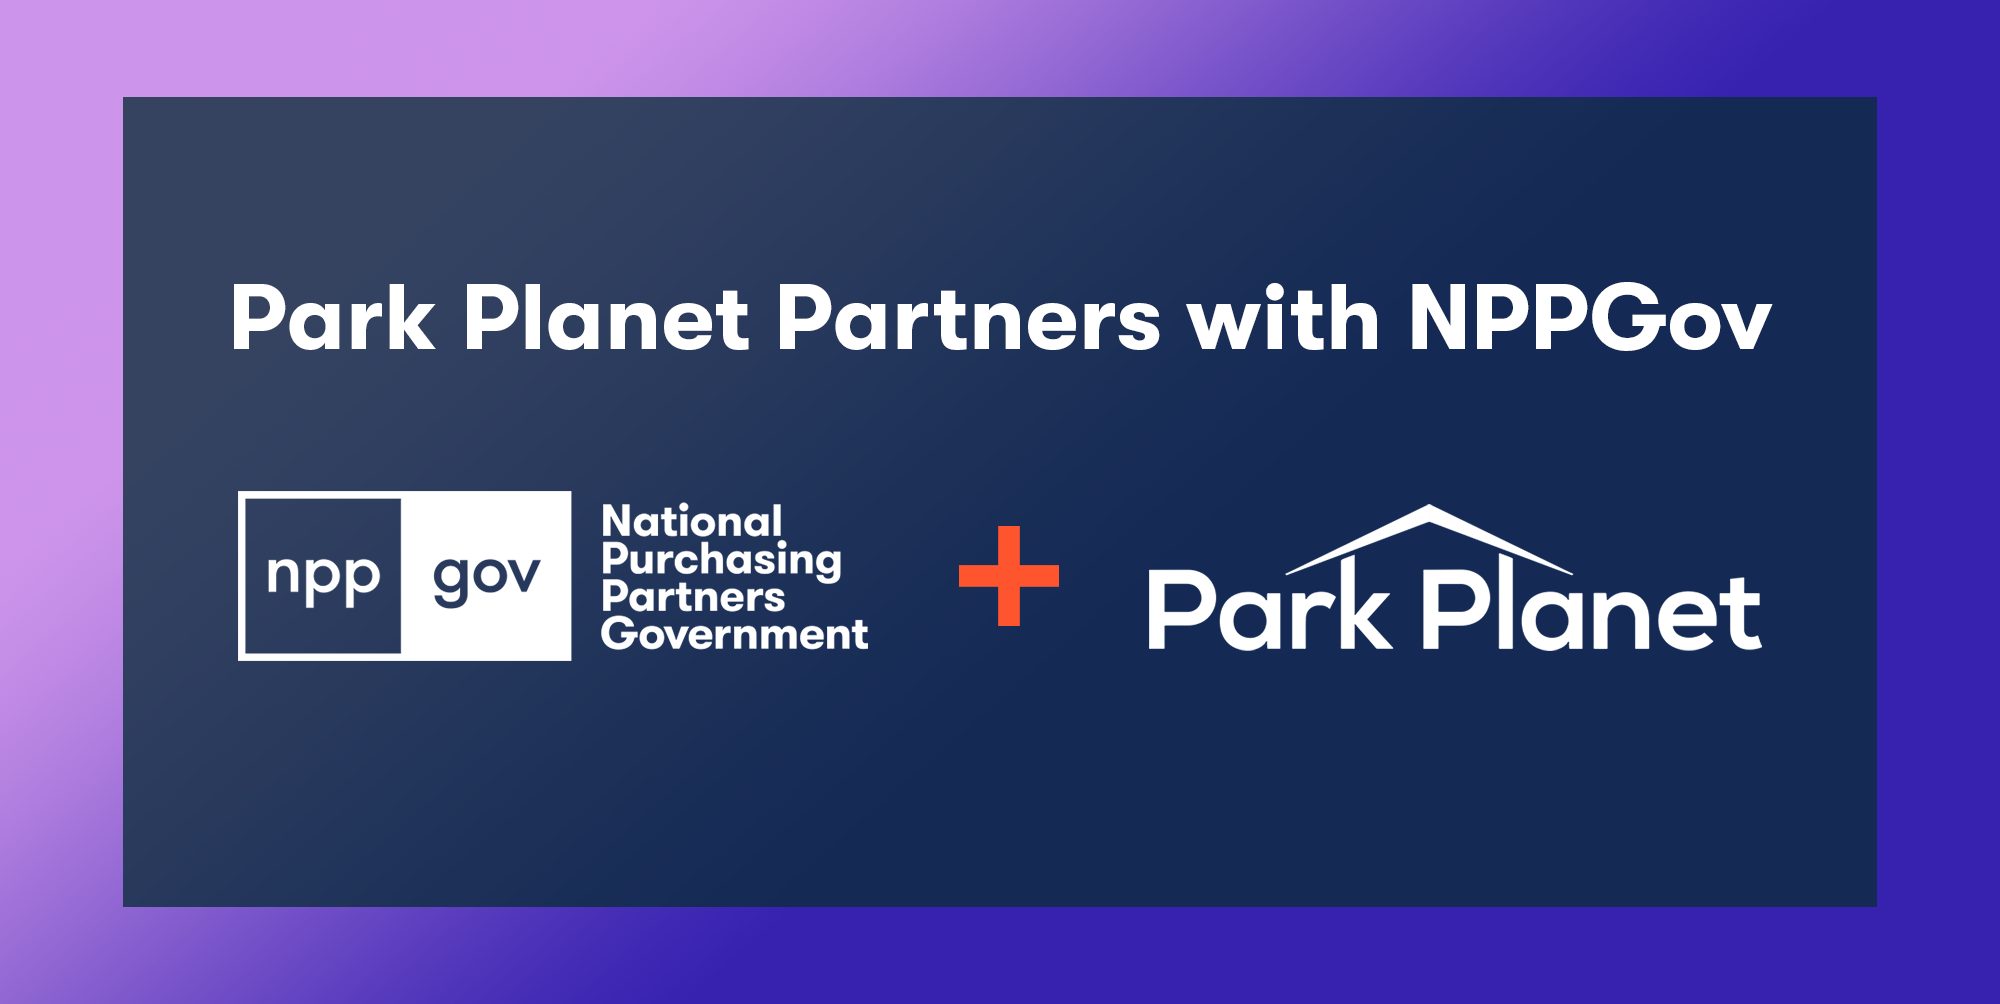 Park Planet Partners with NPPGov